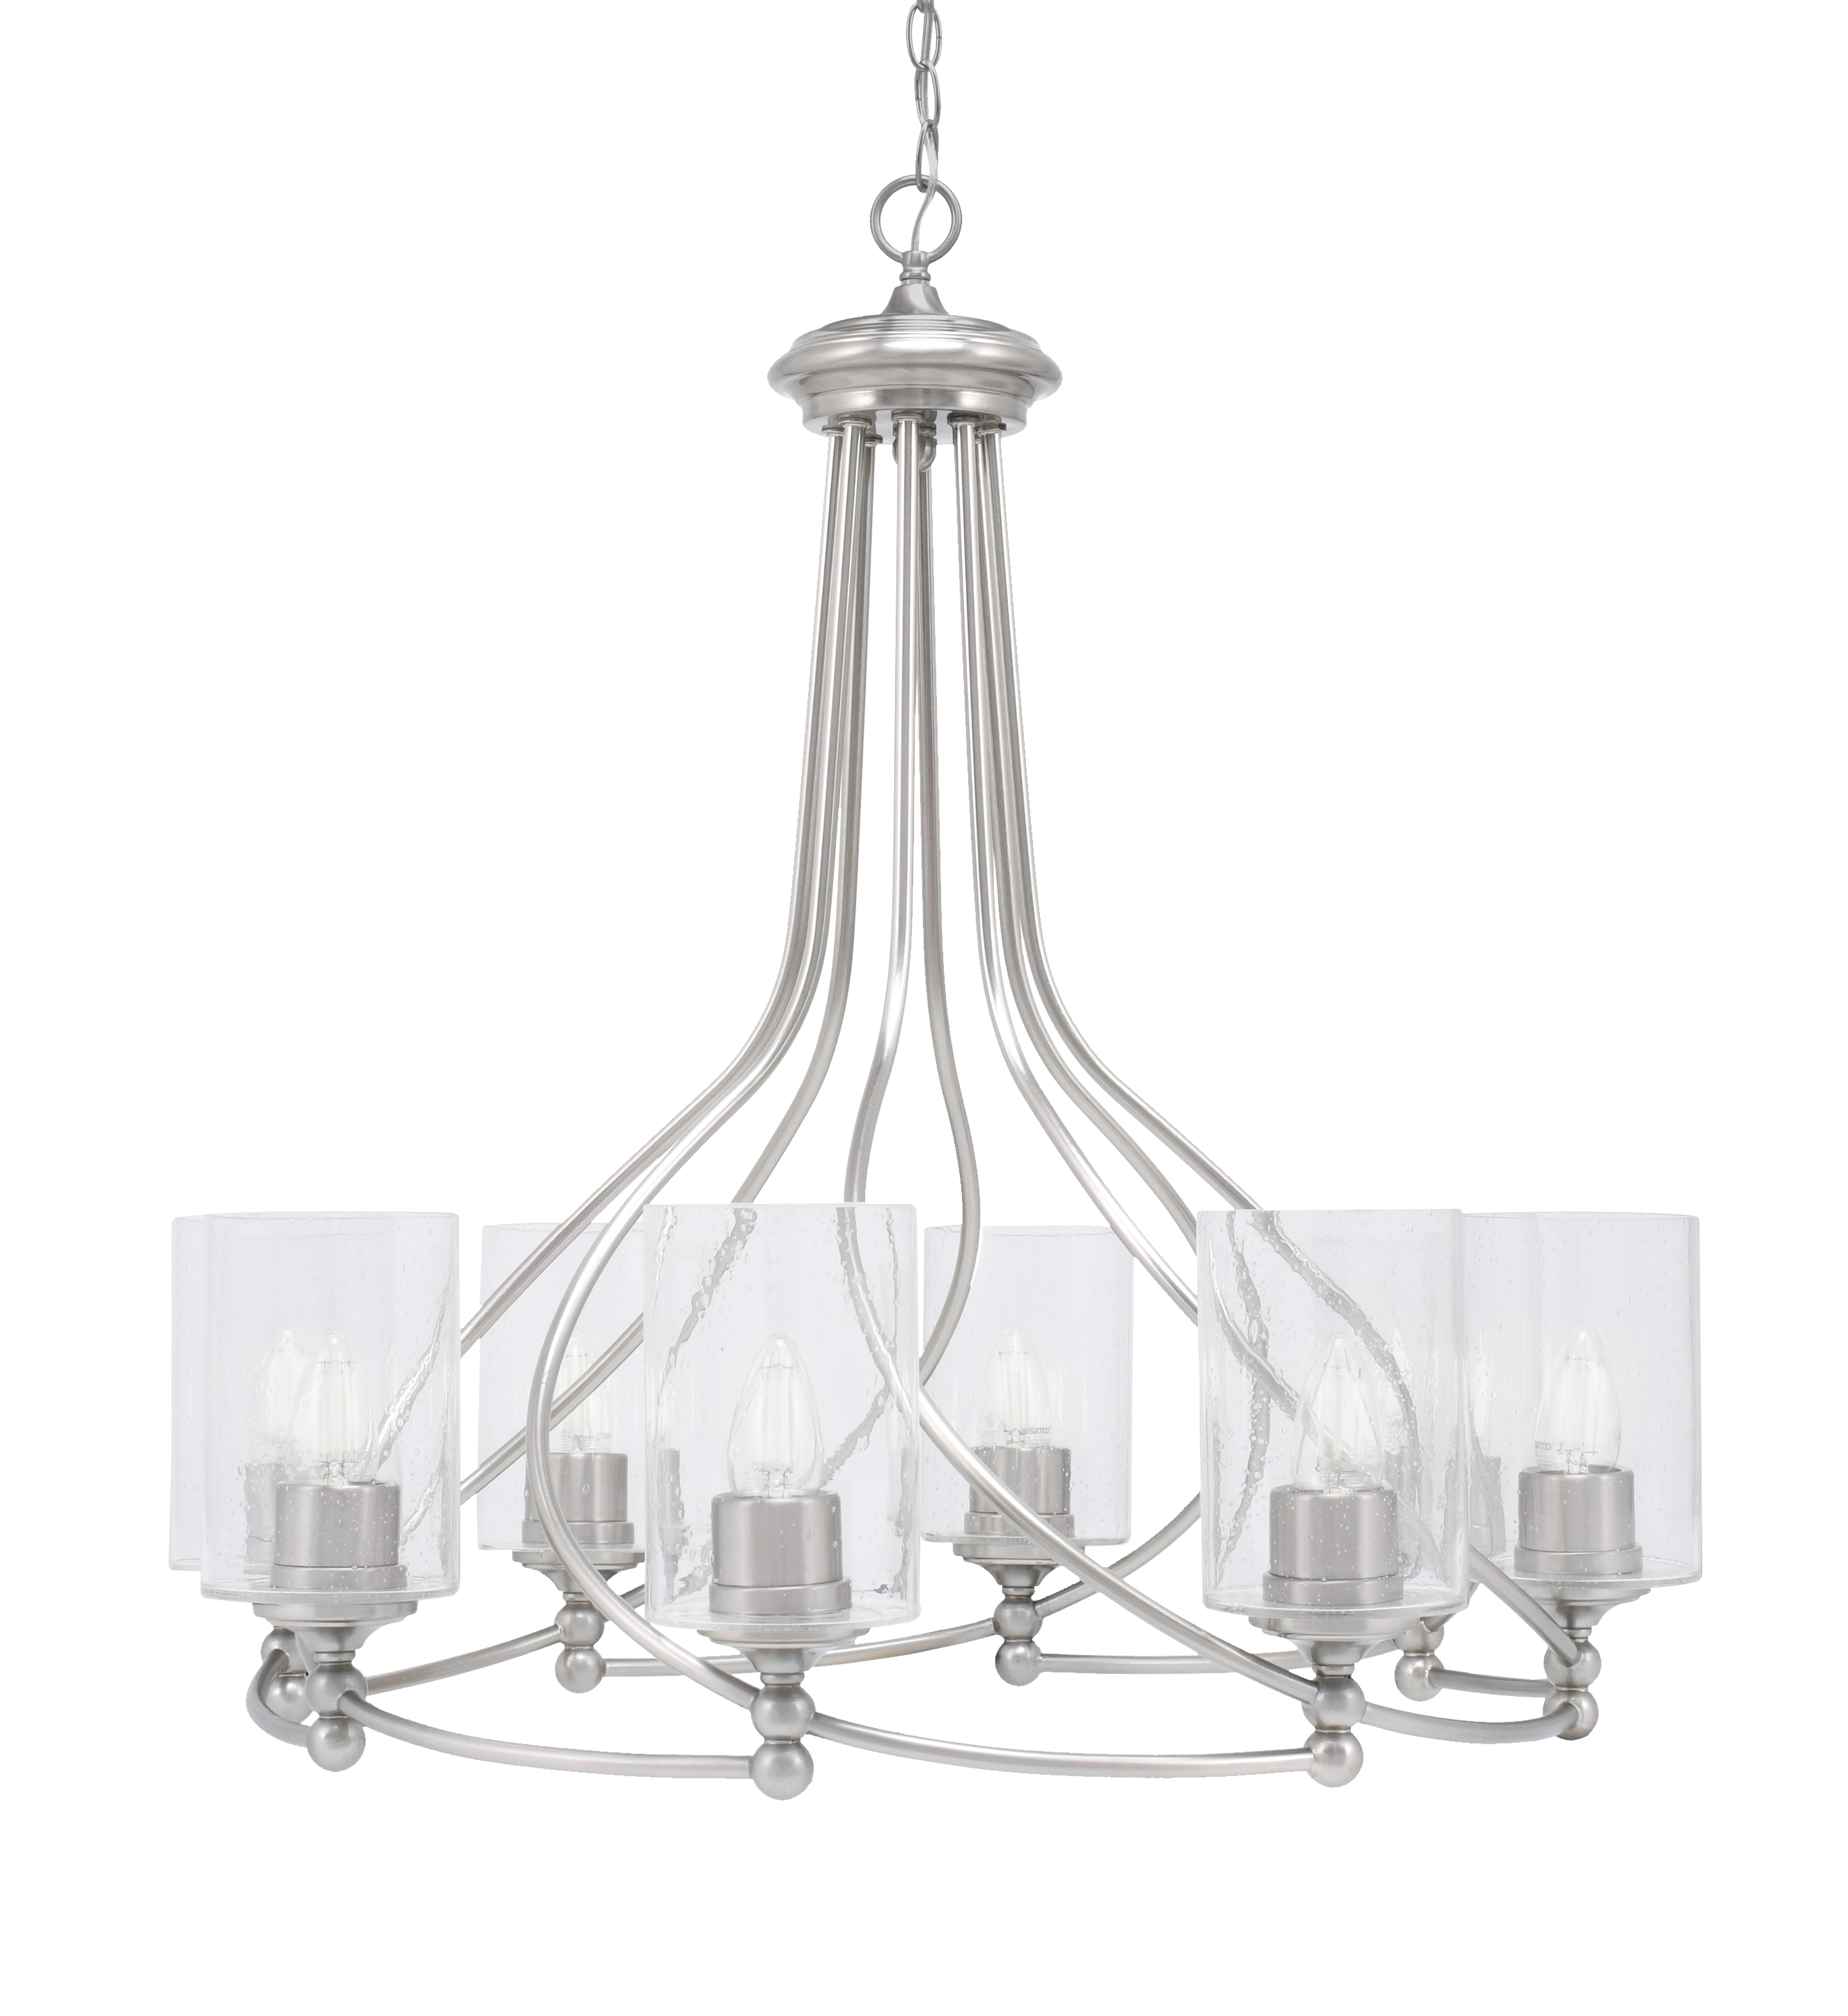 Toltec Lighting 908-BN-300 Capri Uplight, 8 Light, Chandelier Shown In Brushed Nickel Finish With 4" Clear Bubble Glass